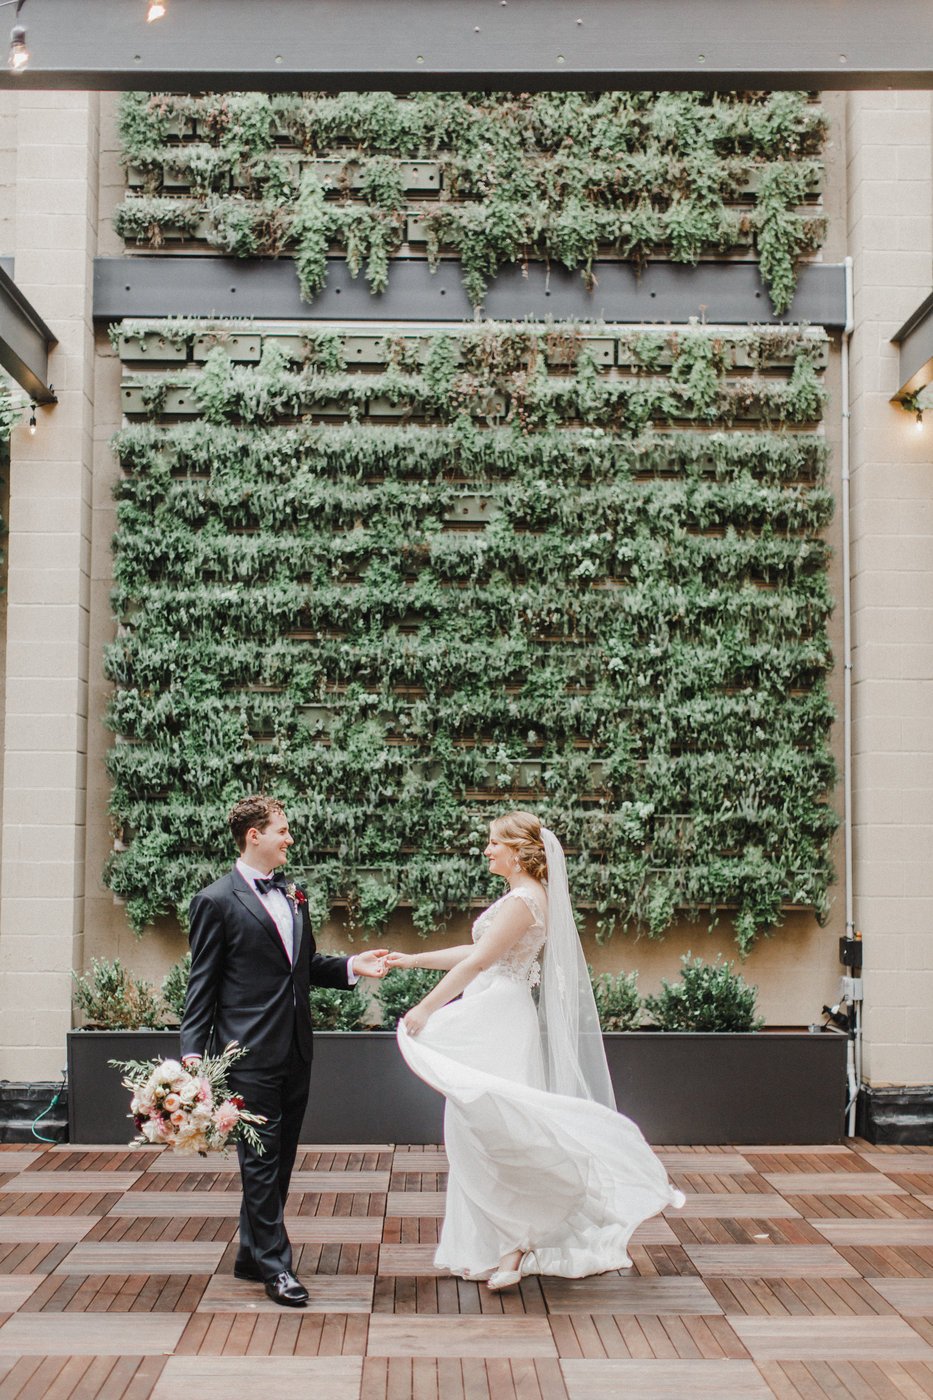 Bride and Groom dancing in front of green succulent wall at Excelsior venue